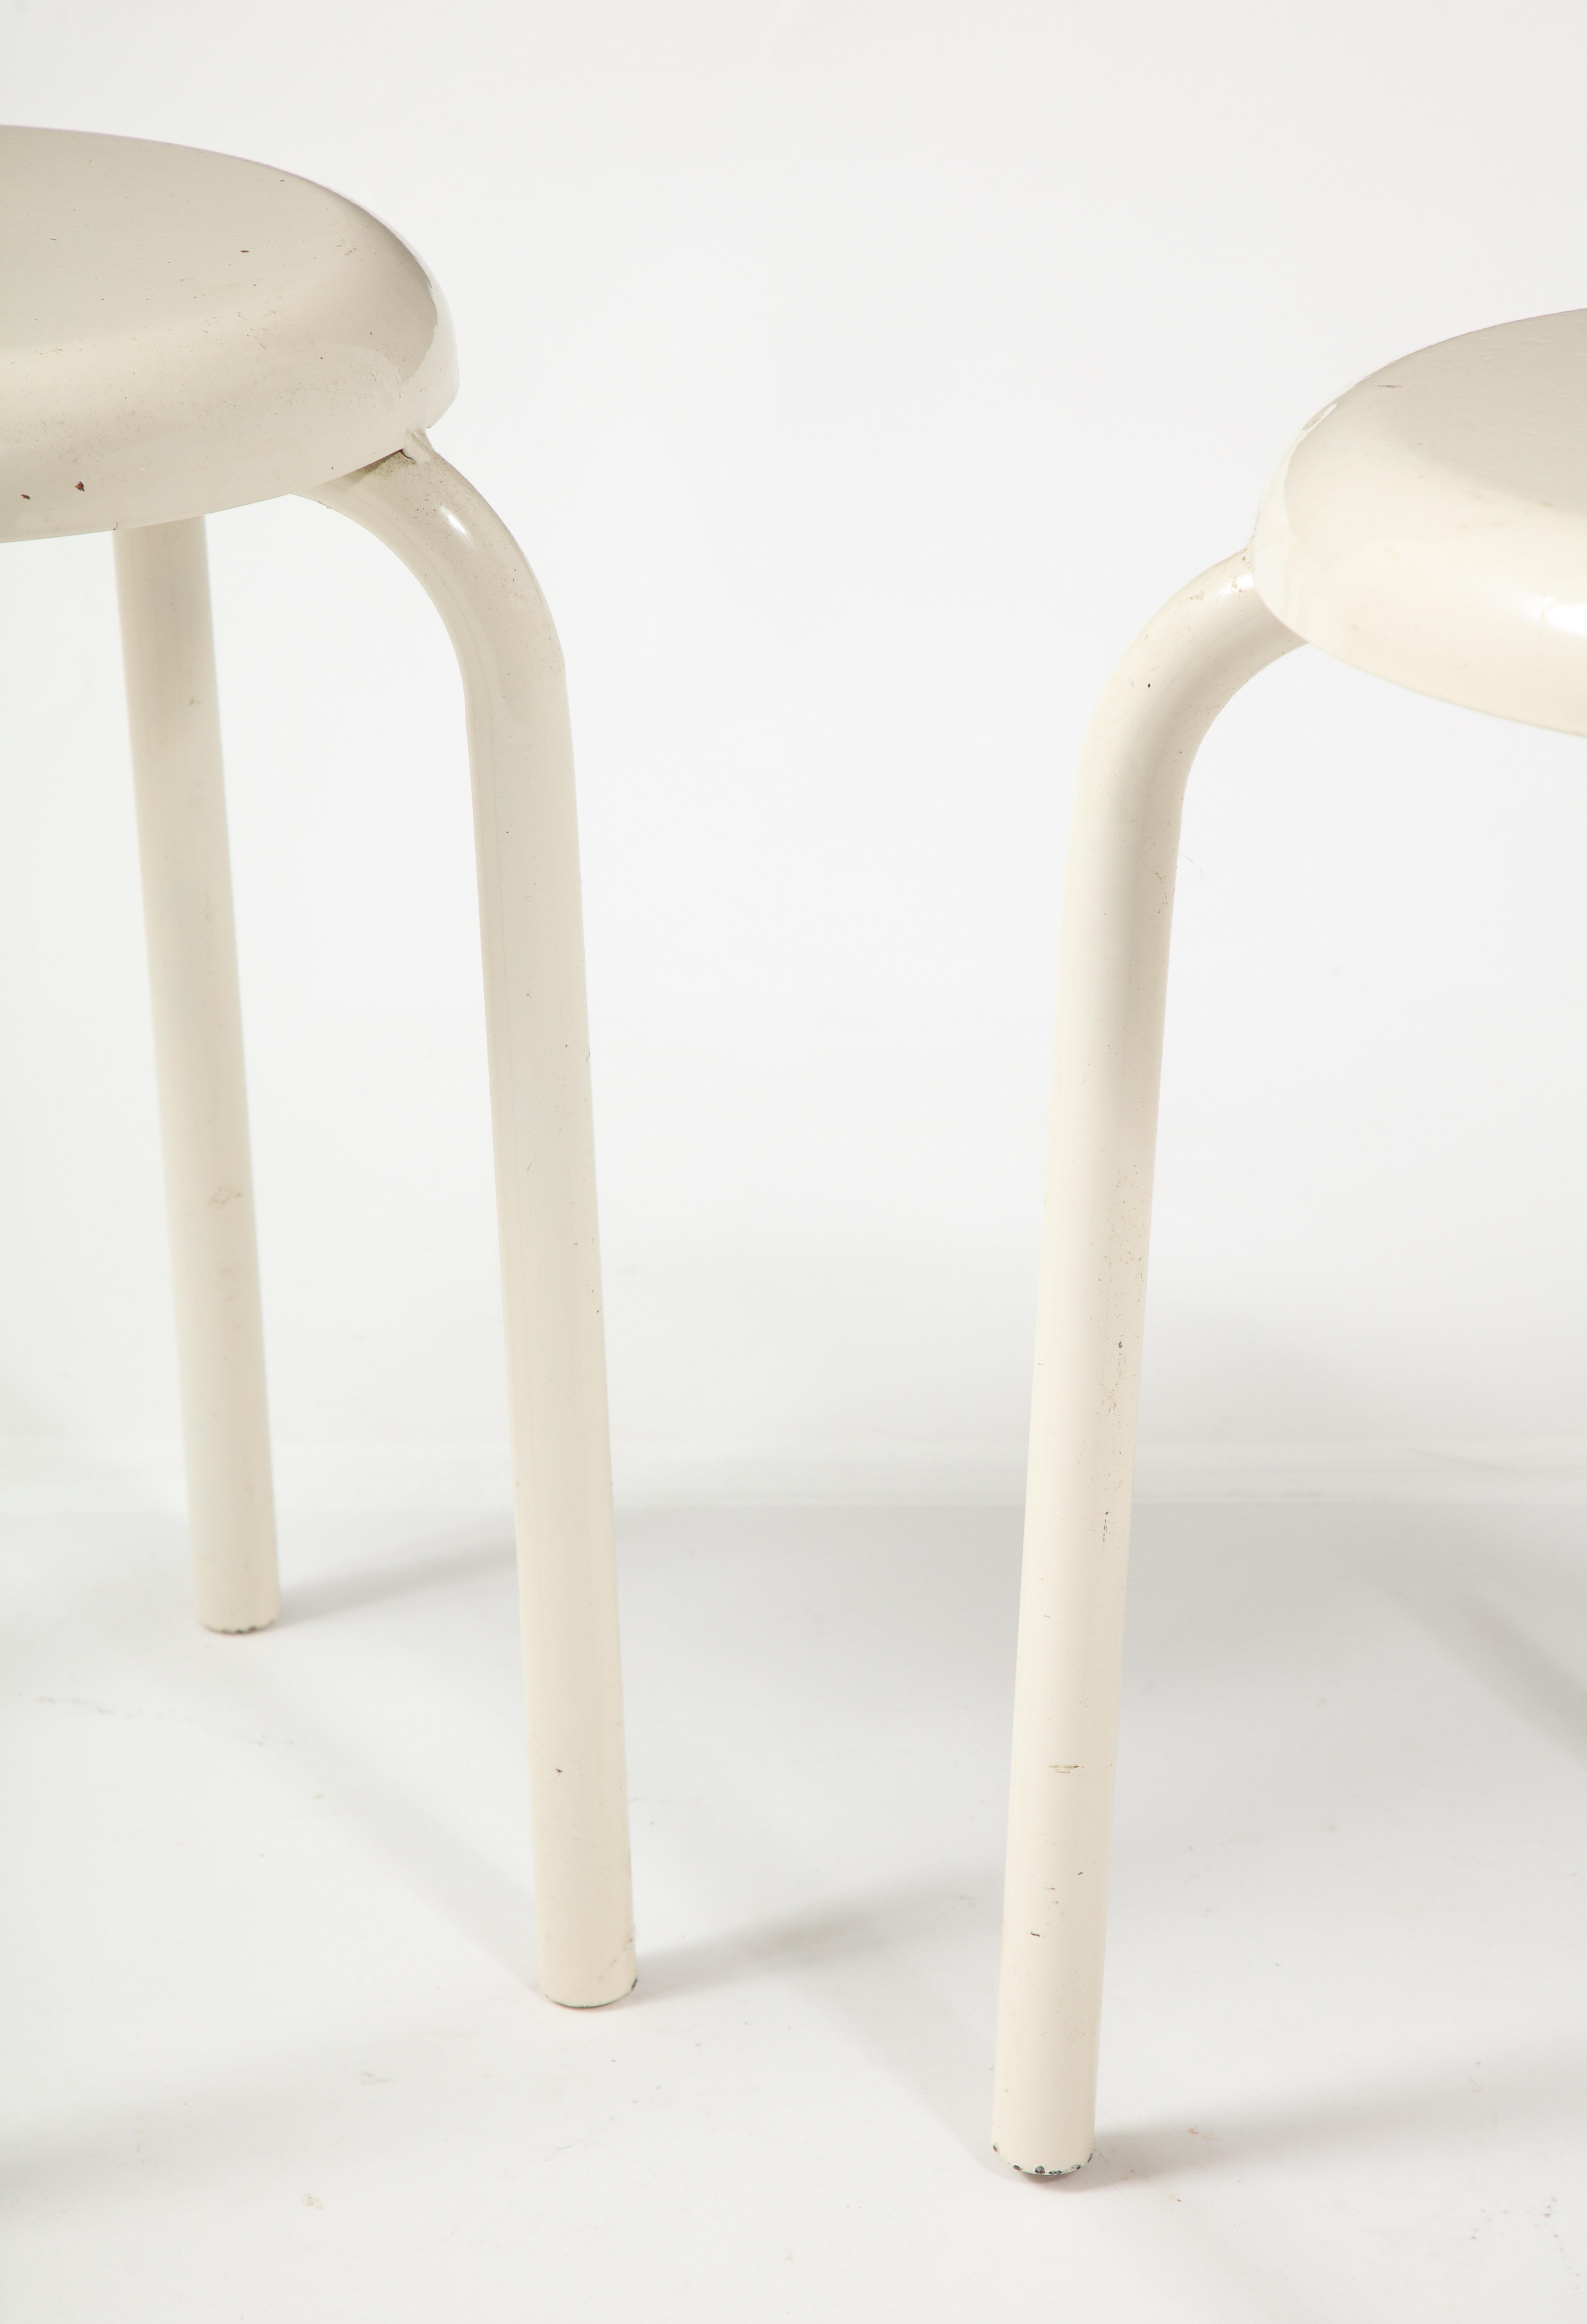 20th Century White Enameled Steel Stools, France 1960's For Sale